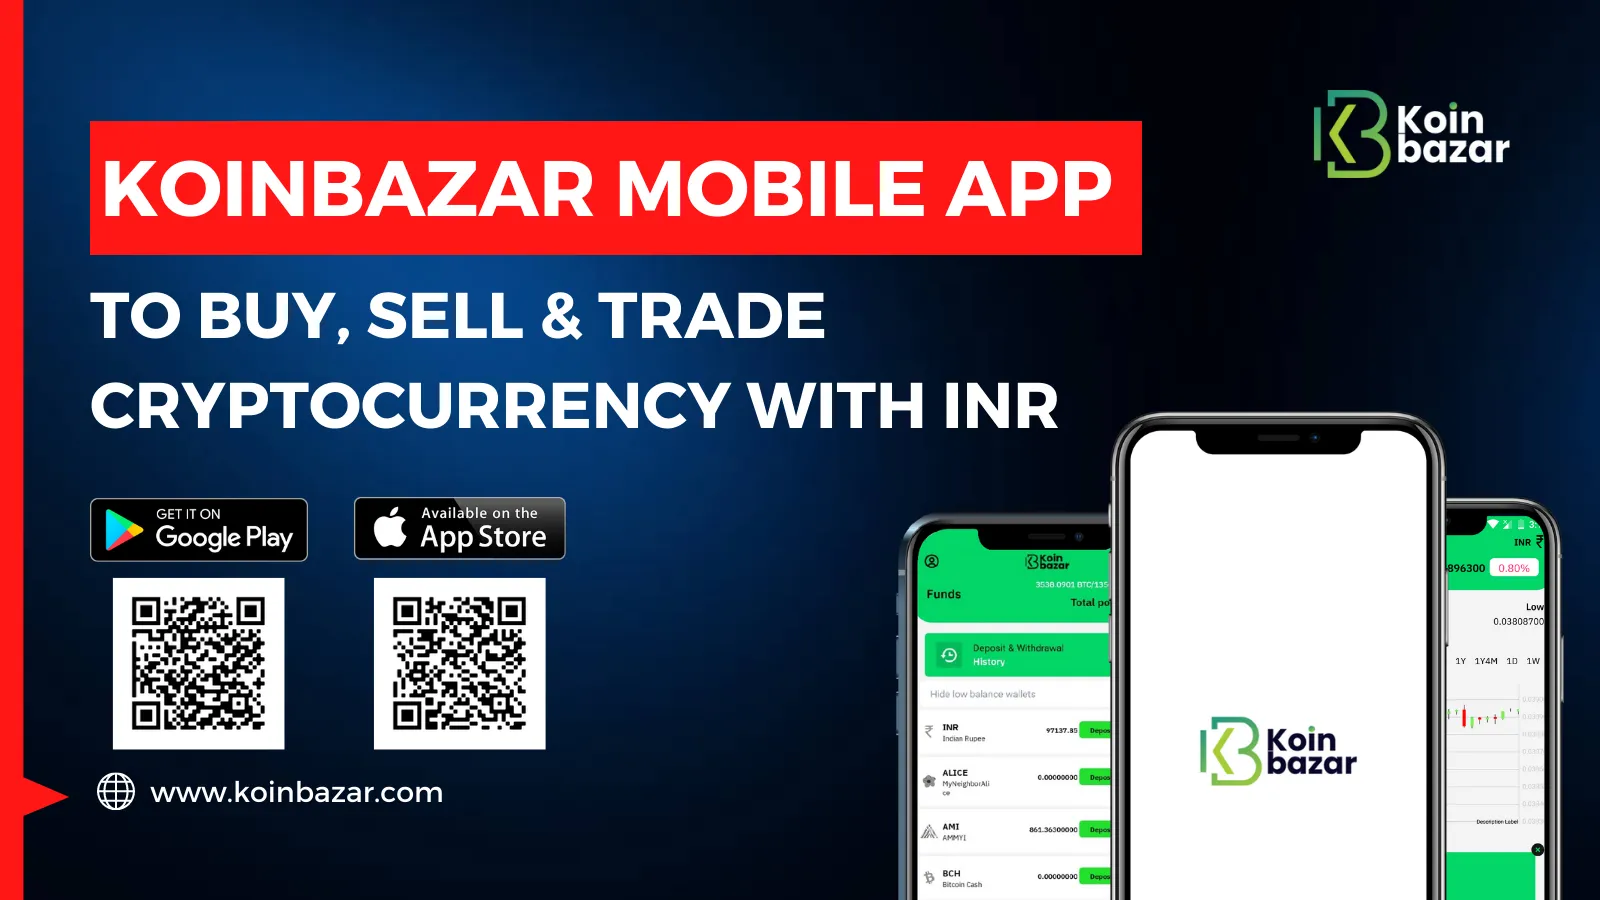 Koinbazar Mobile App To Trade Cryptocurrencies with INR